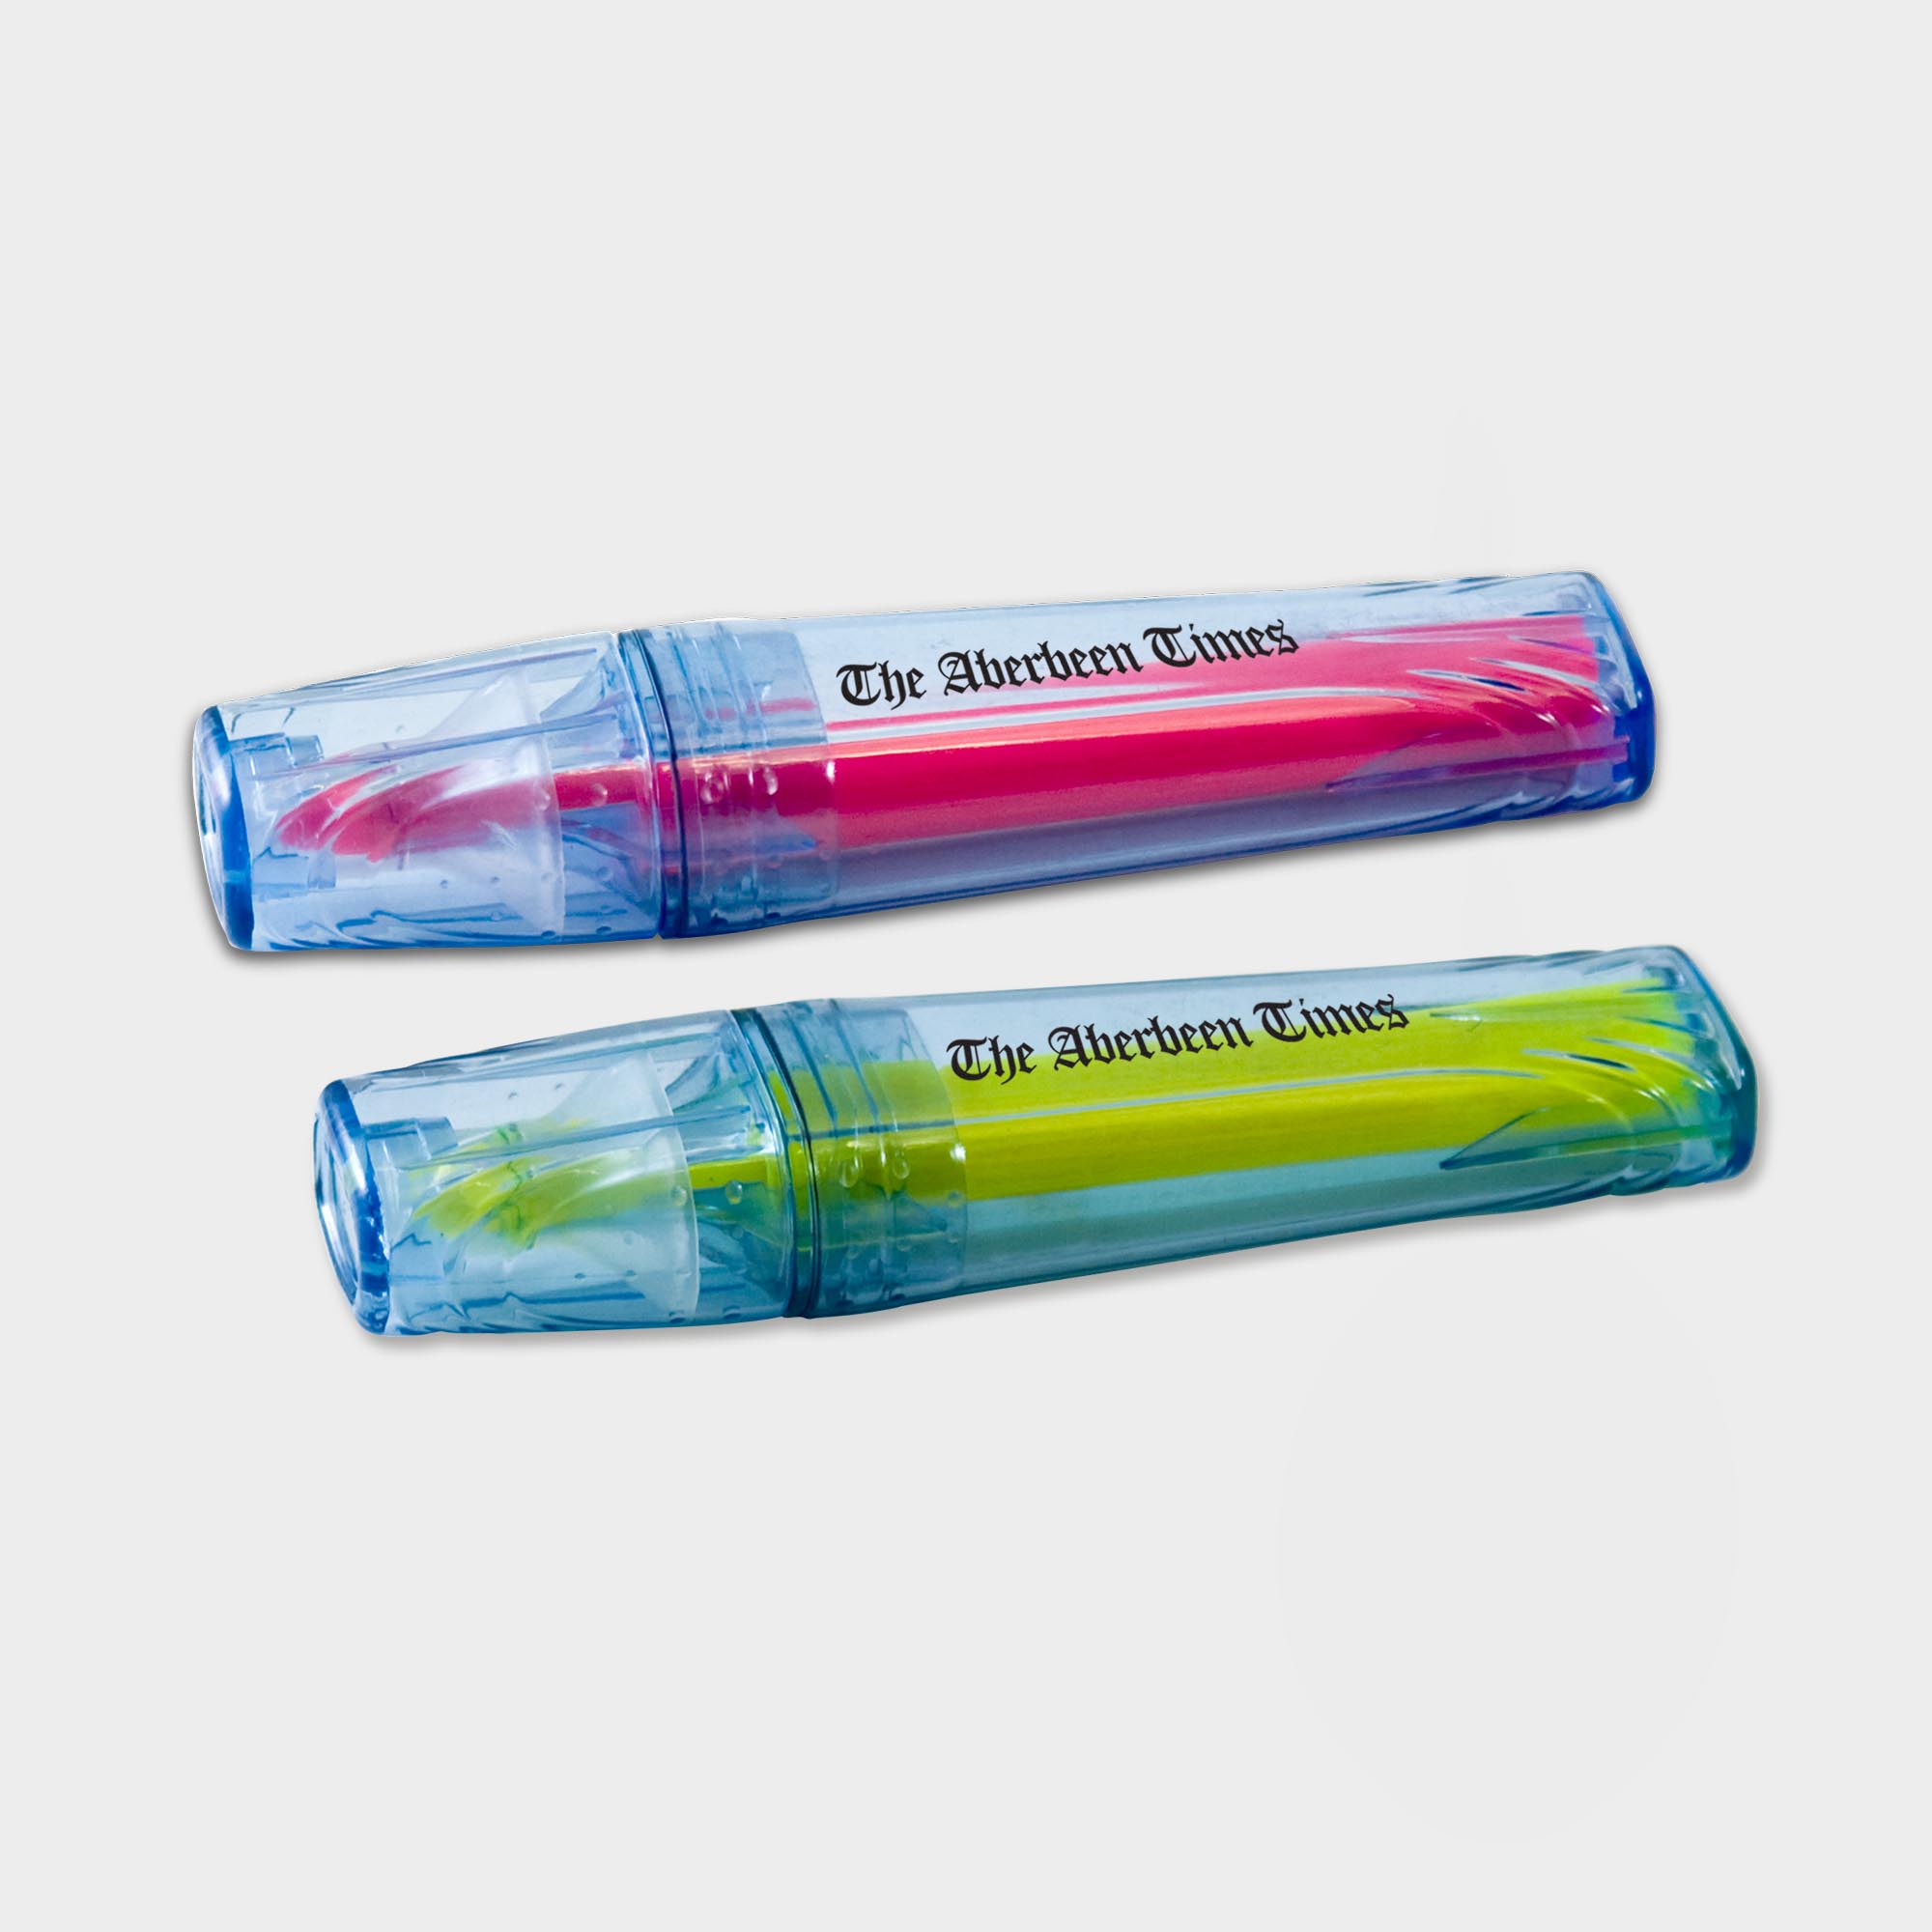 The Green & Good Highlighter Pen made from recycled bottles (PET). Clear blue body and lid, available with a yellow or pink refill / ink.